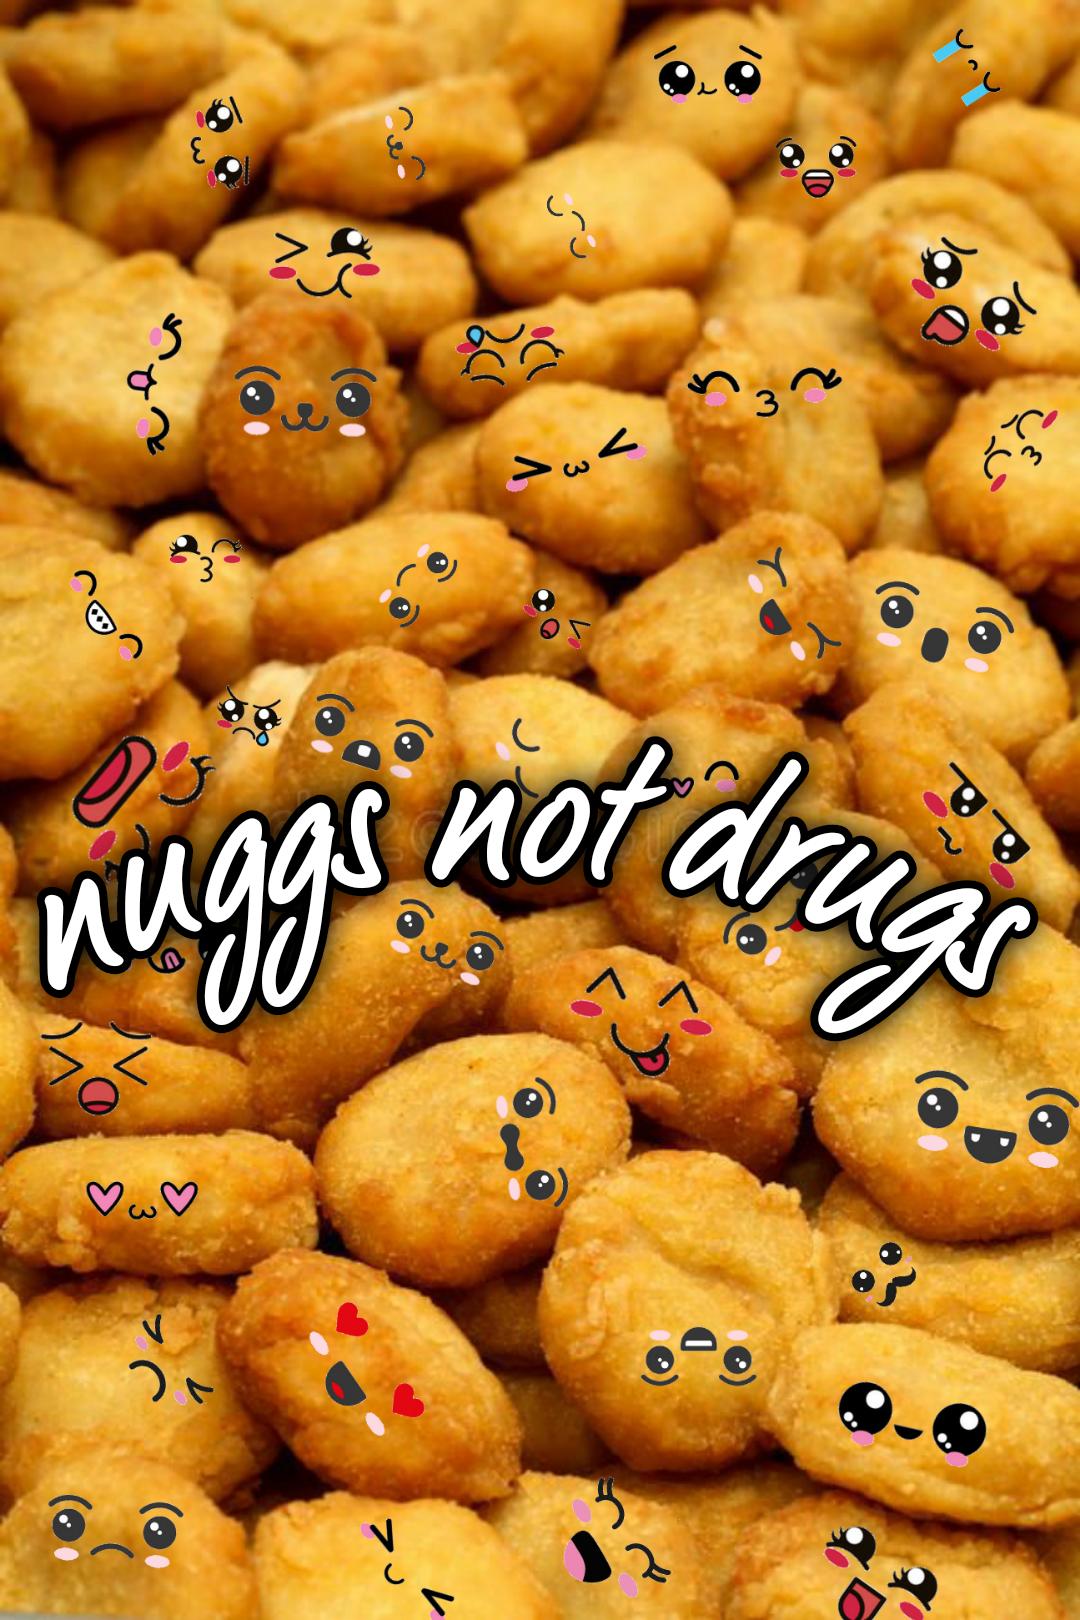 Stupid wallpaper. Whatever I didnt just spend half an hour giving every nugget it's own face